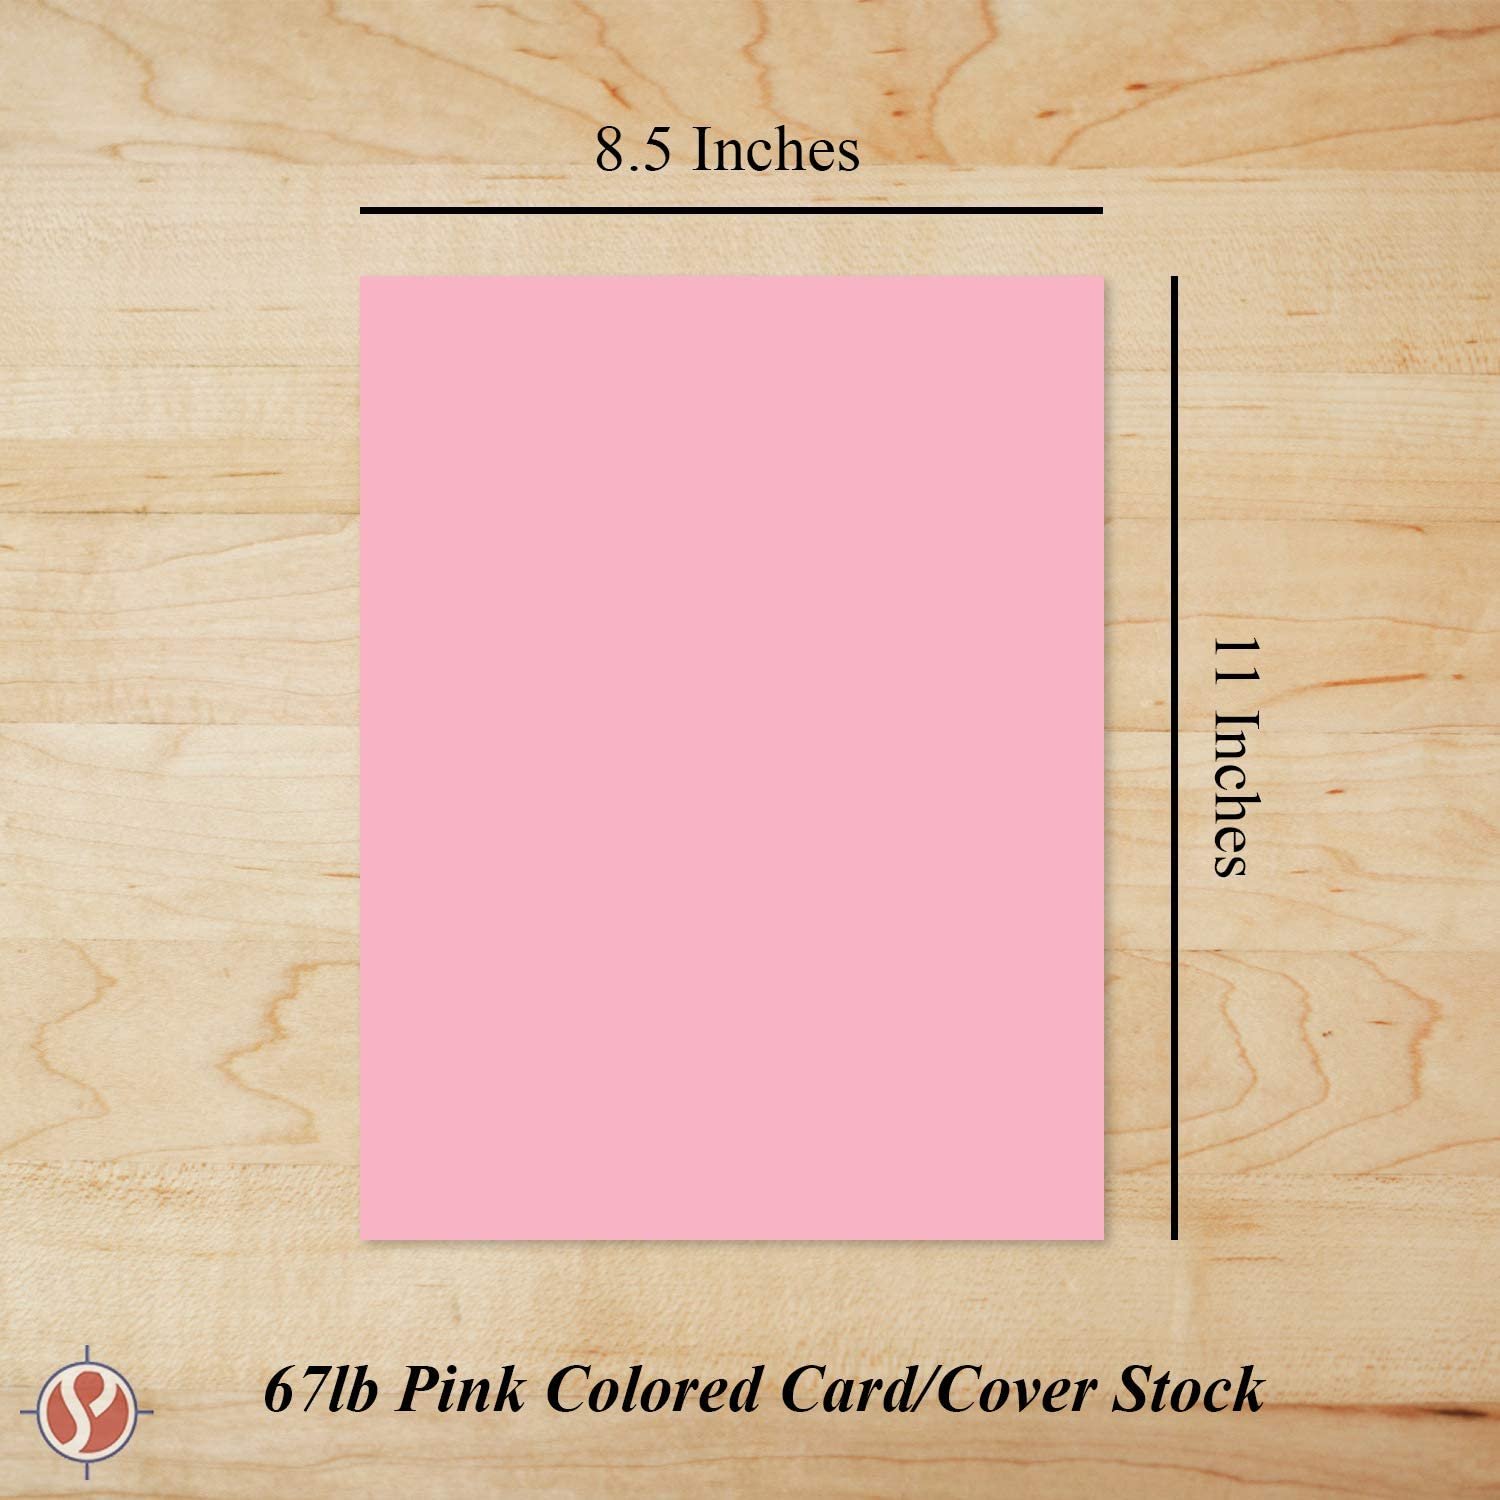 Pink Card Stock Paper - for Stationery Art and Craft, Printing and School Projects | 8.5 x 11 Pastel Colored Medium Weight Cardstock, 67 lb Vellum